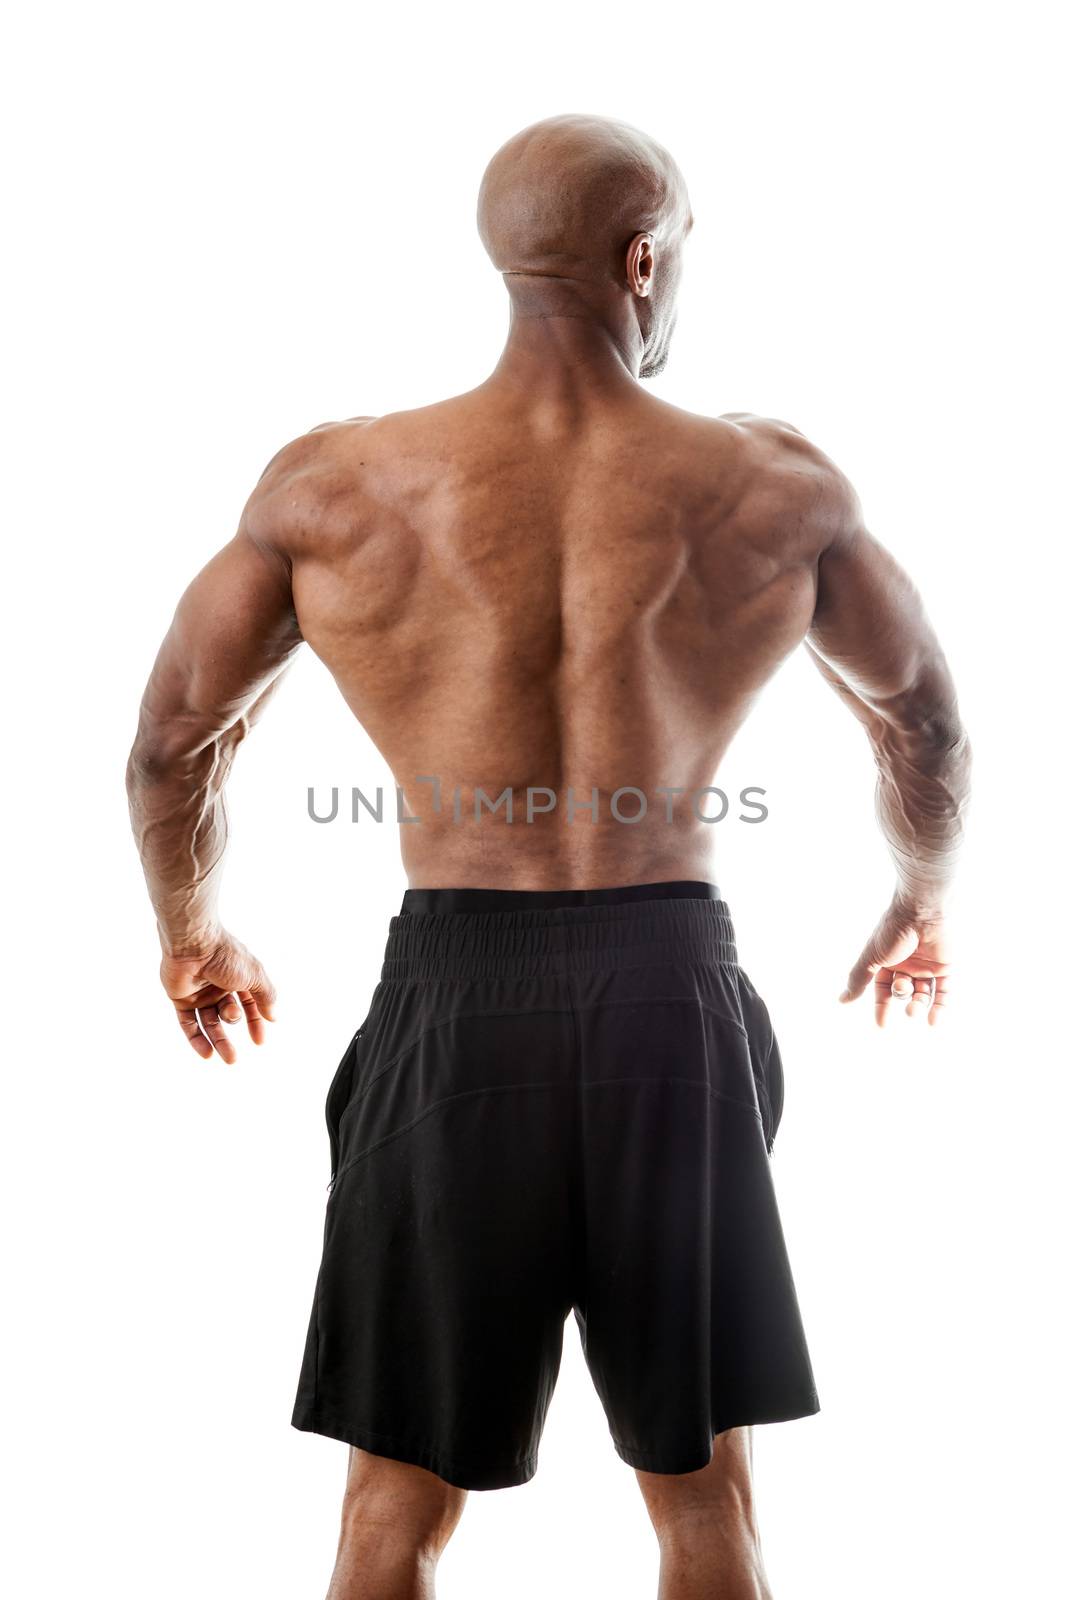 Toned and ripped lean muscle fitness man standing in front of a white background.